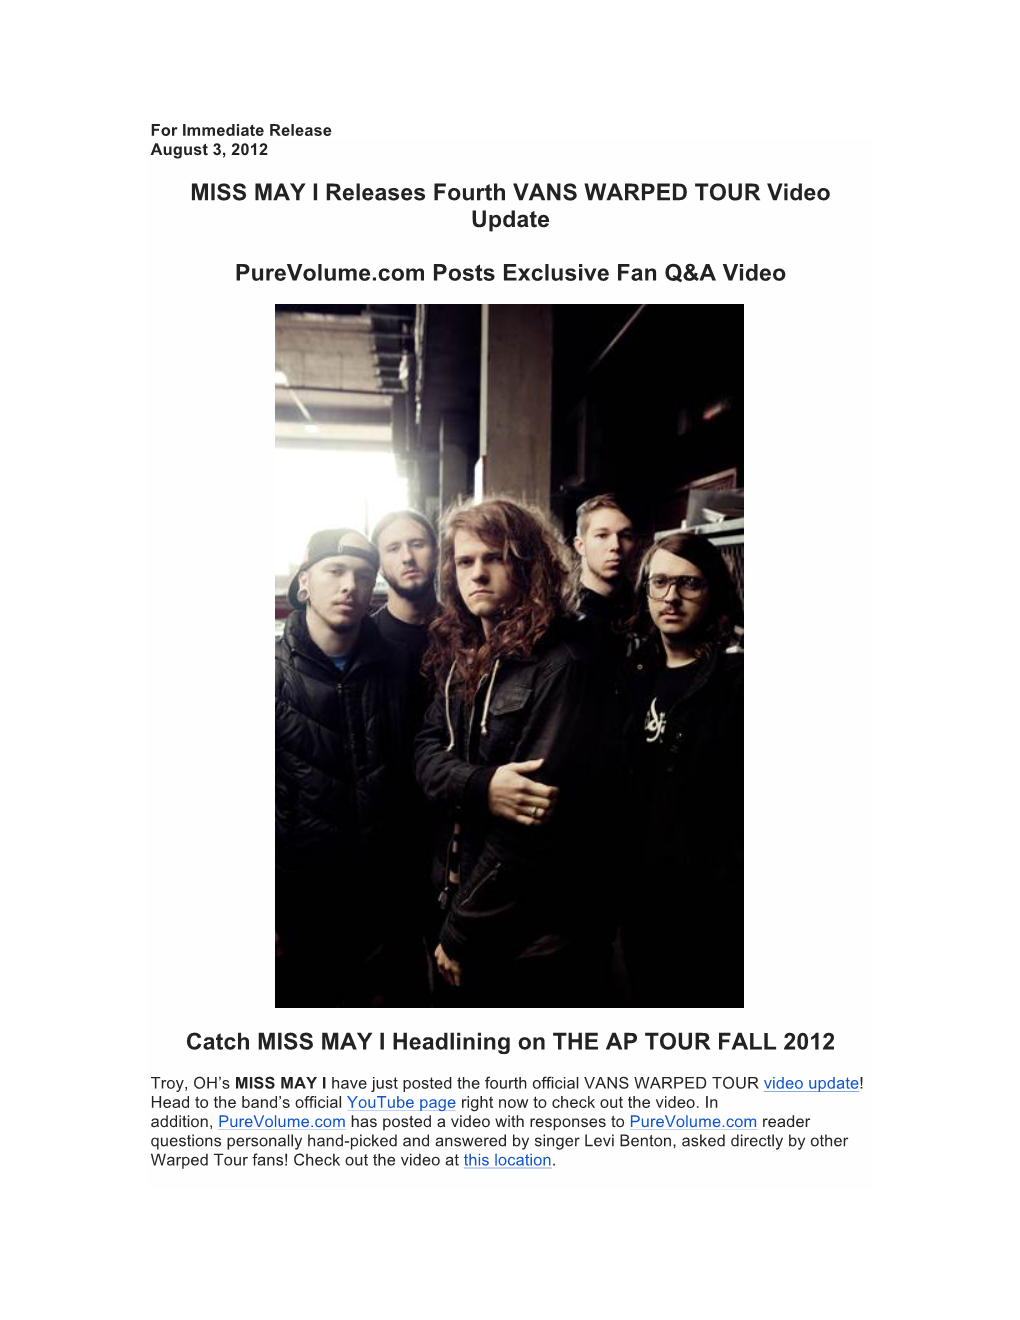 MISS MAY I Releases Fourth VANS WARPED TOUR Video Update